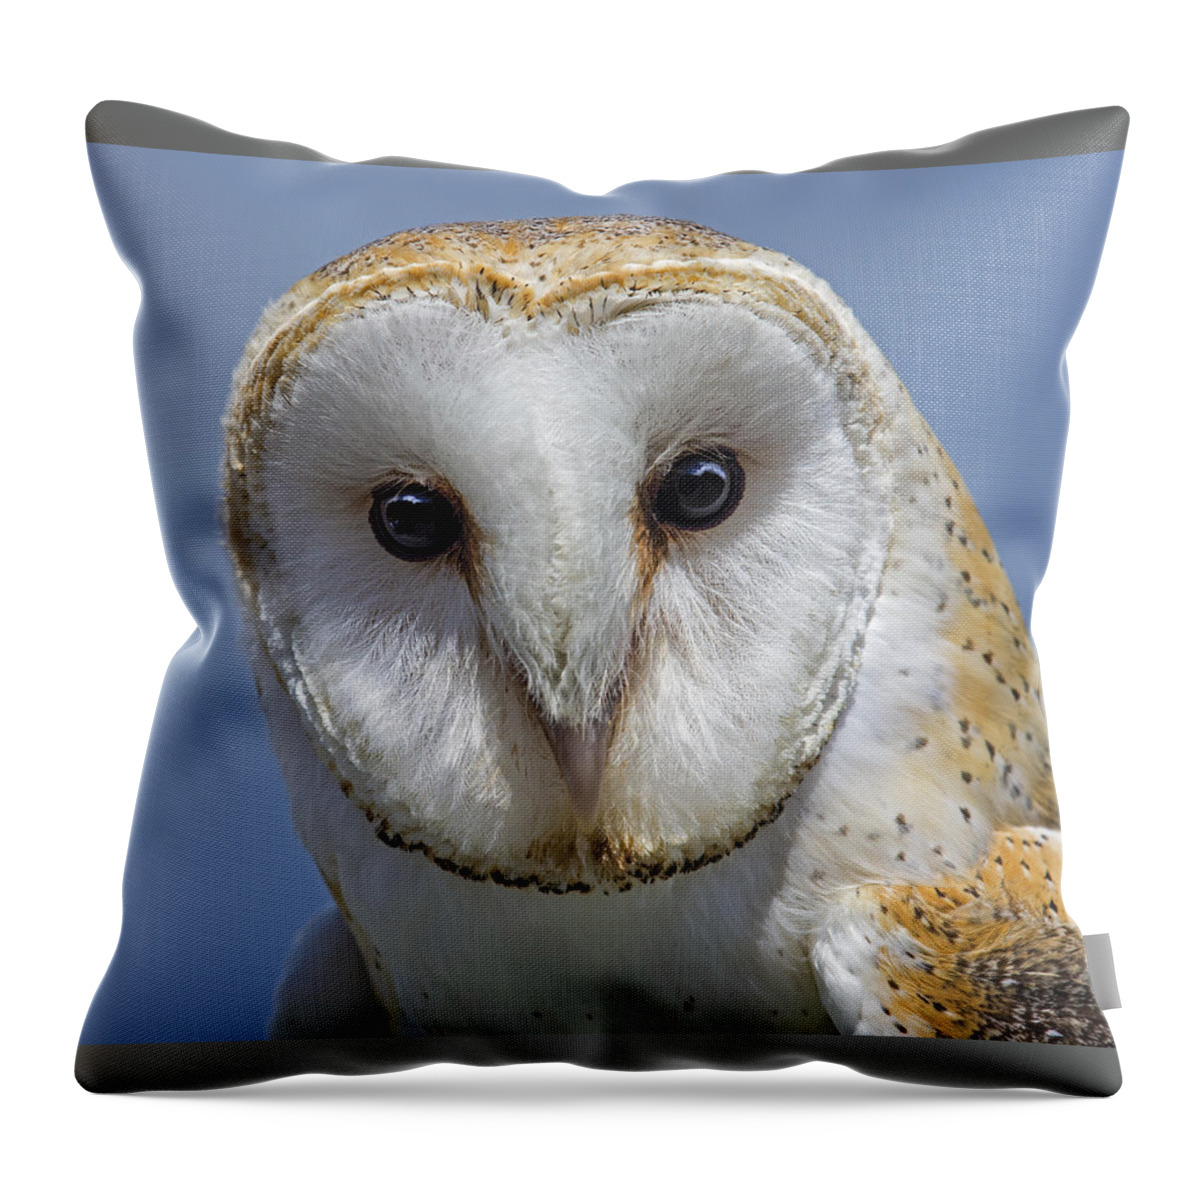 Barn Owl Throw Pillow featuring the photograph Open Door by Tony Beck